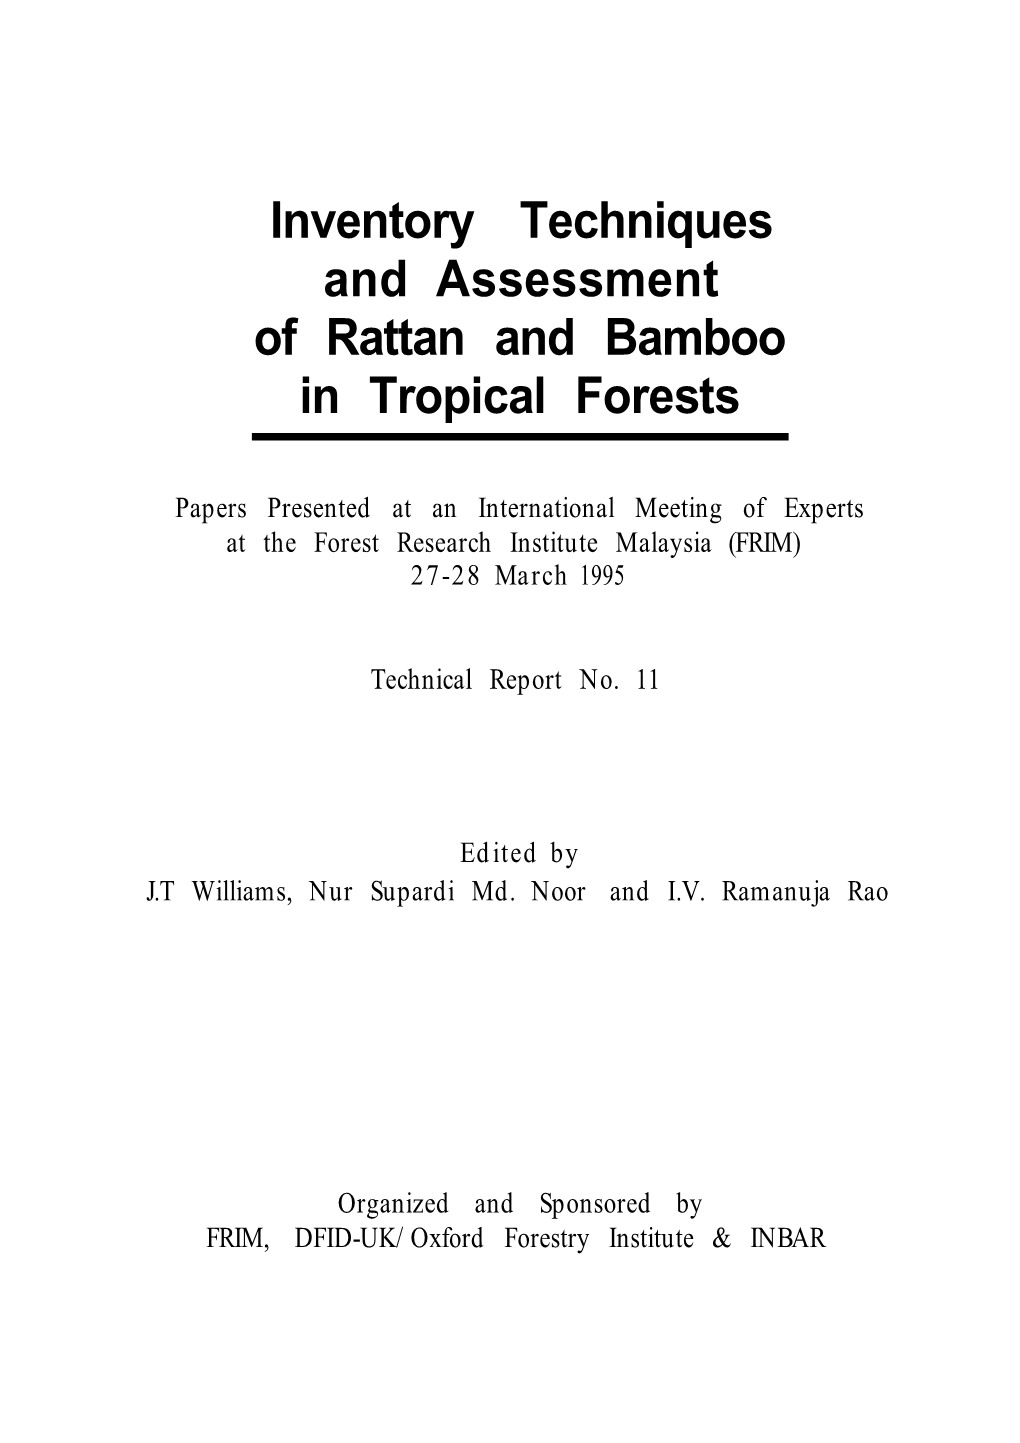 Inventory Techniques and Assessment of Rattan and Bamboo in Tropical Forests